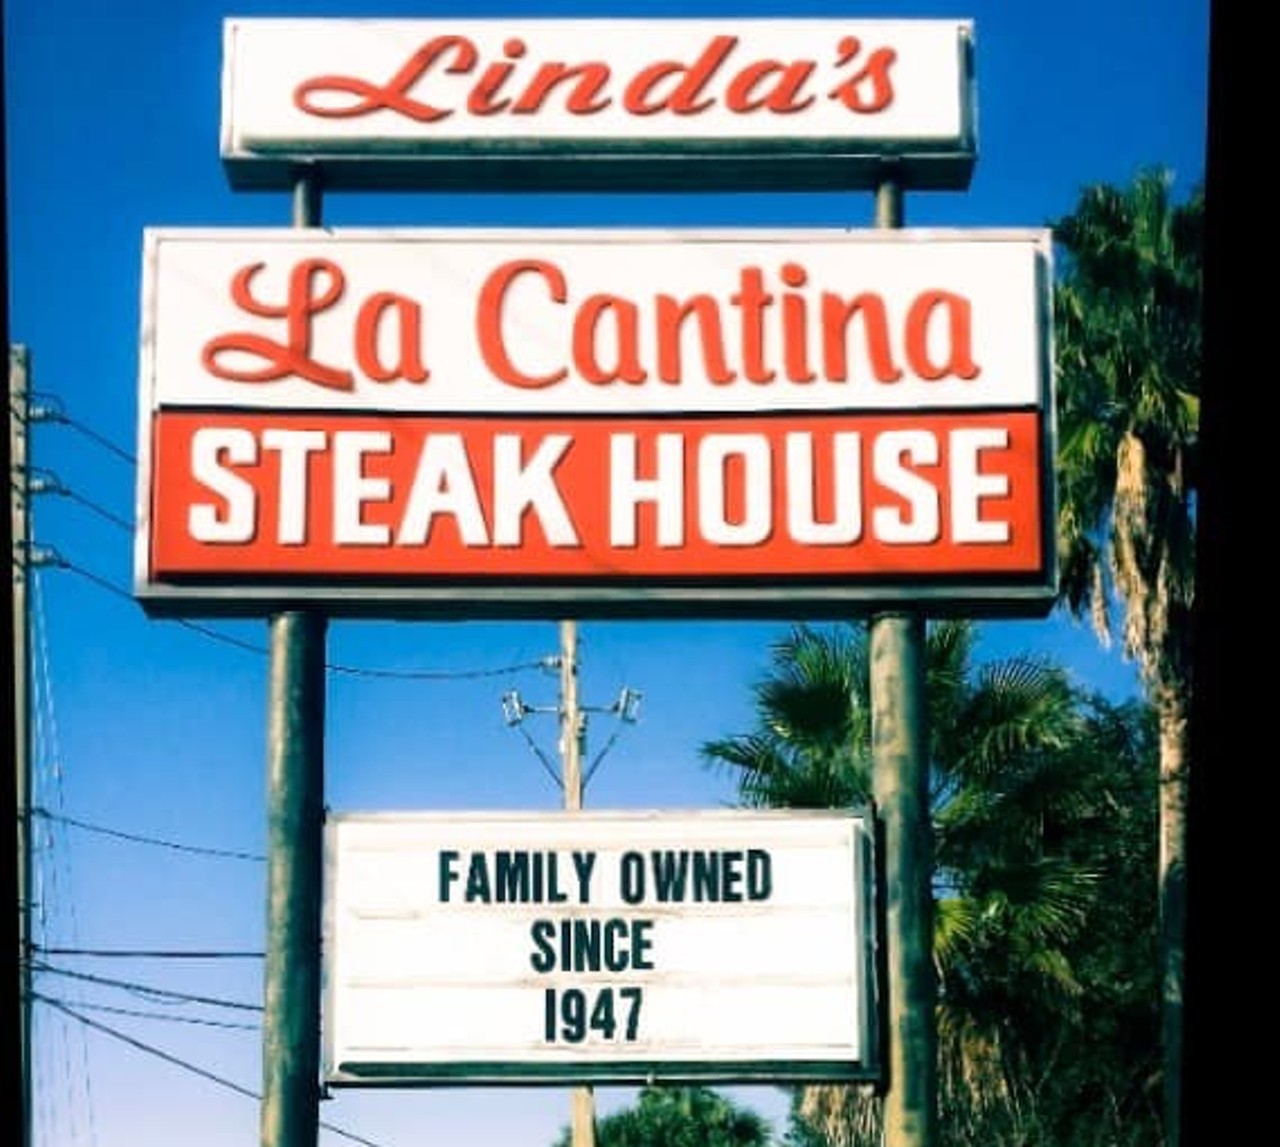 Linda's La Cantina
4721 E. Colonial Drive, Orlando
This award-winning old-school eatery has been serving steaks since 1947. Decked out in classic checkered tablecloths and complete with a fireplace-adorned lounge, Linda's La Cantina is Orlando staple. It's not a stuffy place, but it's so popular that reservations are a must.